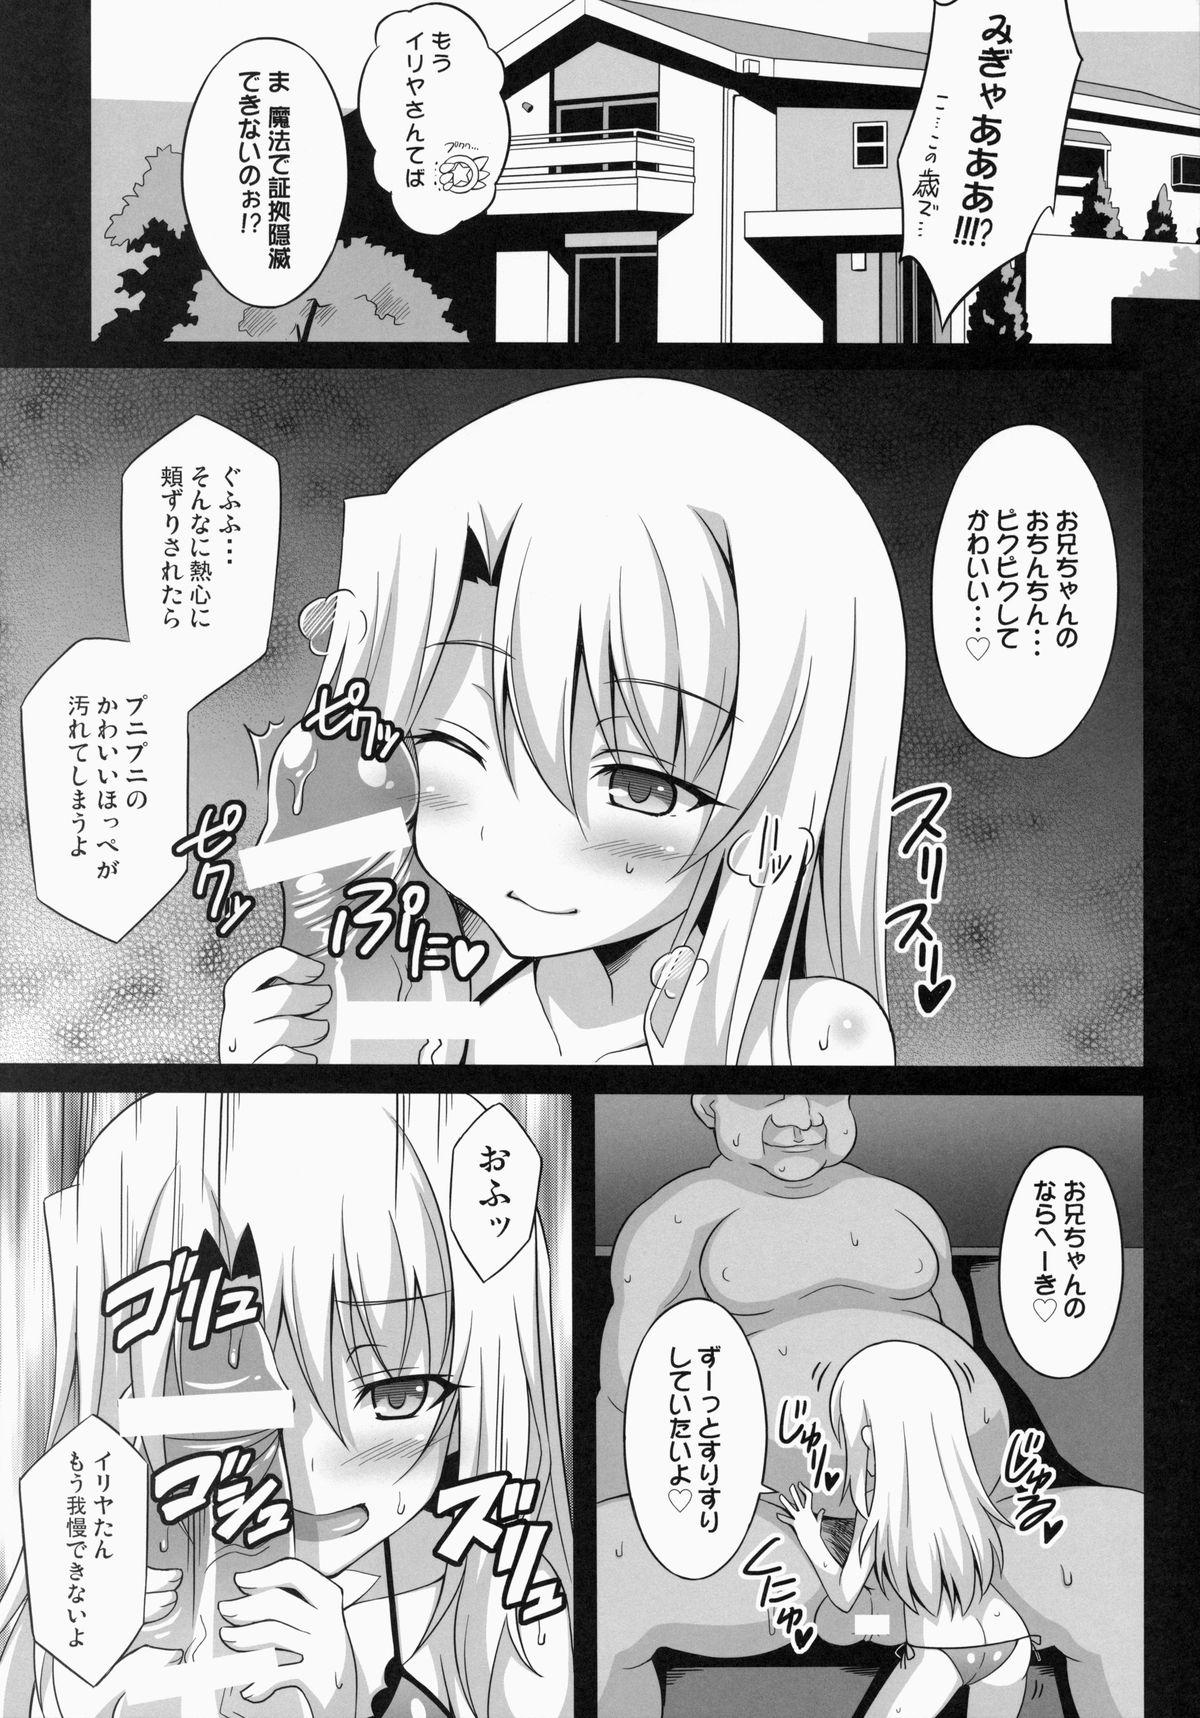 Sexy Girl Datenshi XX EPISODE 1 - Fate kaleid liner prisma illya Russia - Page 6